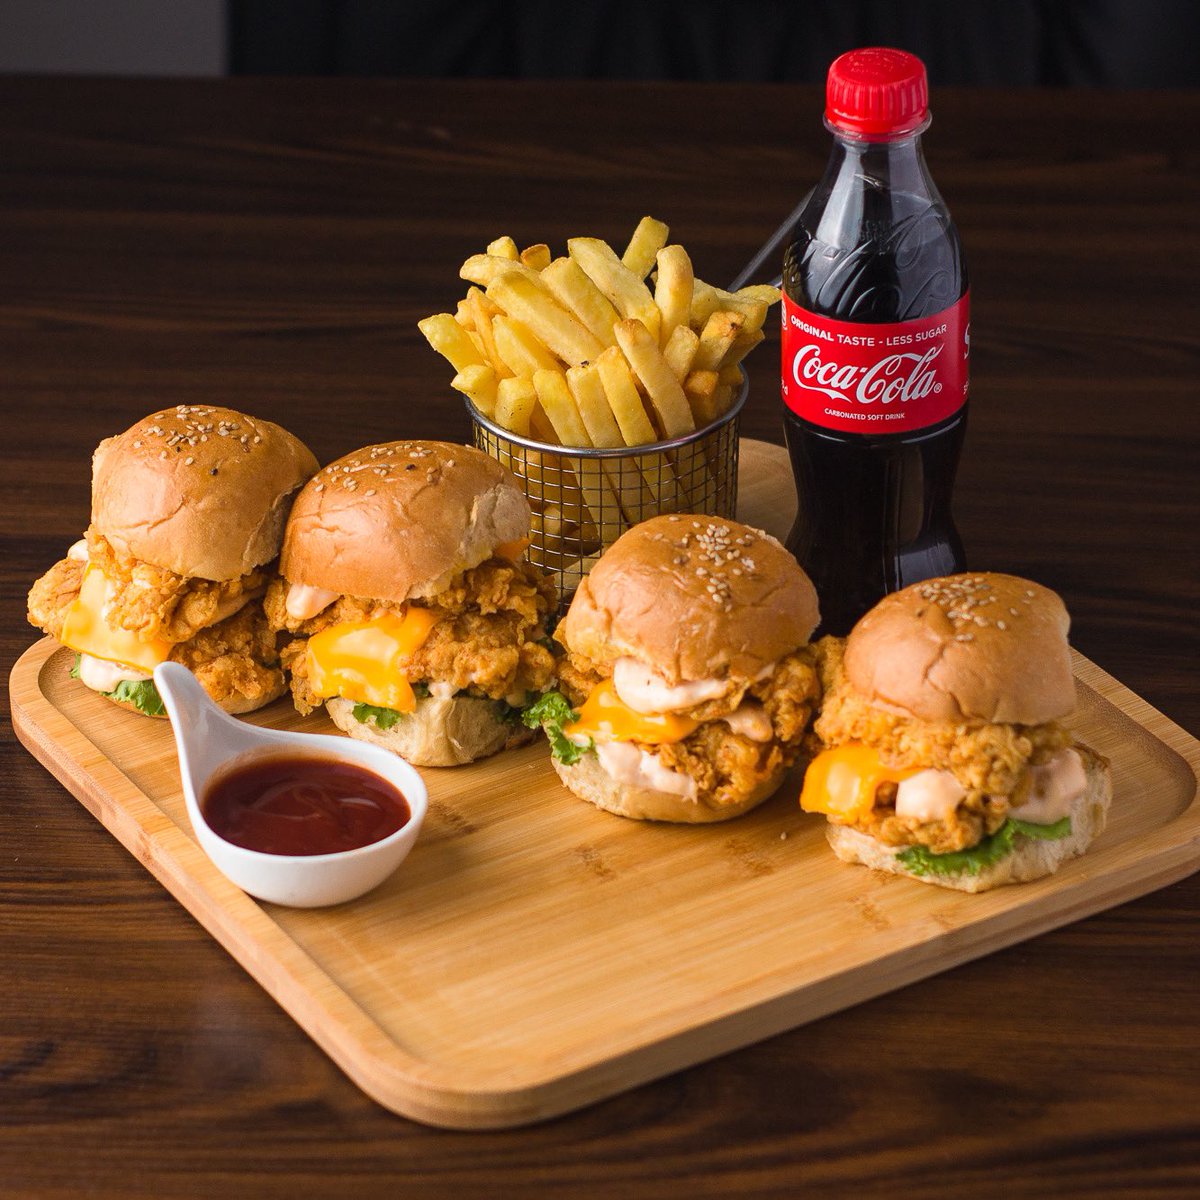 My Girlfriend is not Hungry Platter comes with 4 mini sliders, fries & pop soda, let’s deliver to your office 
#AbujaTwitterCommunity #food #abuja #easterspecial